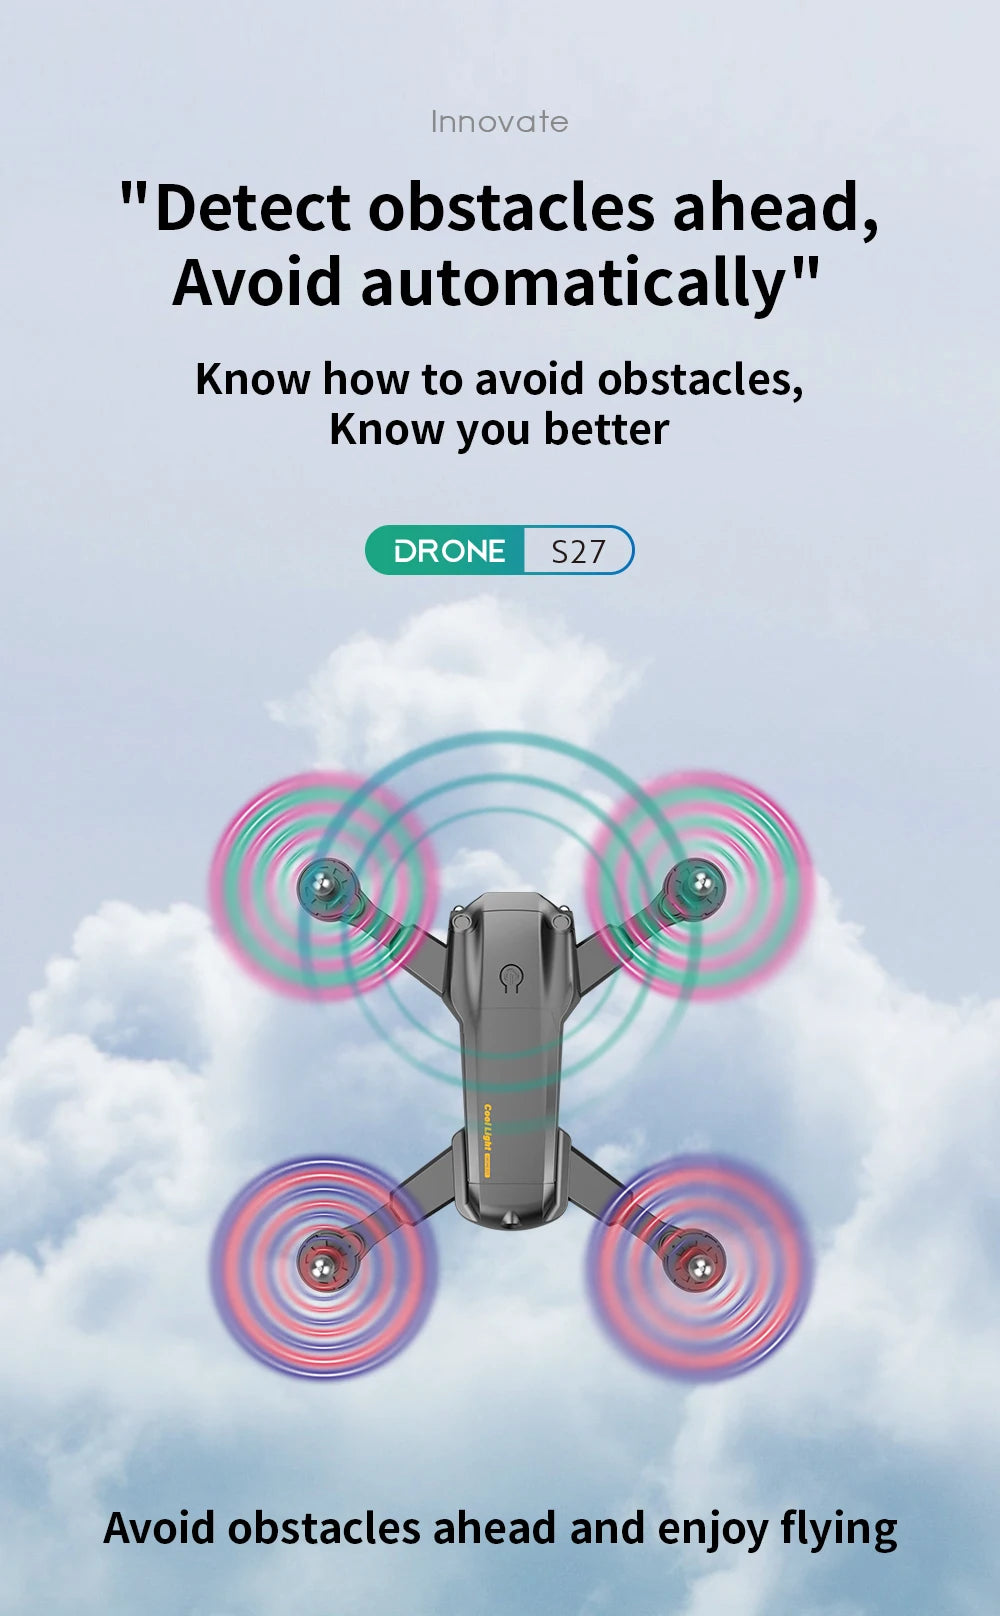 S27 Drone, drone s27 avoids obstacles ahead, avoids automatically .